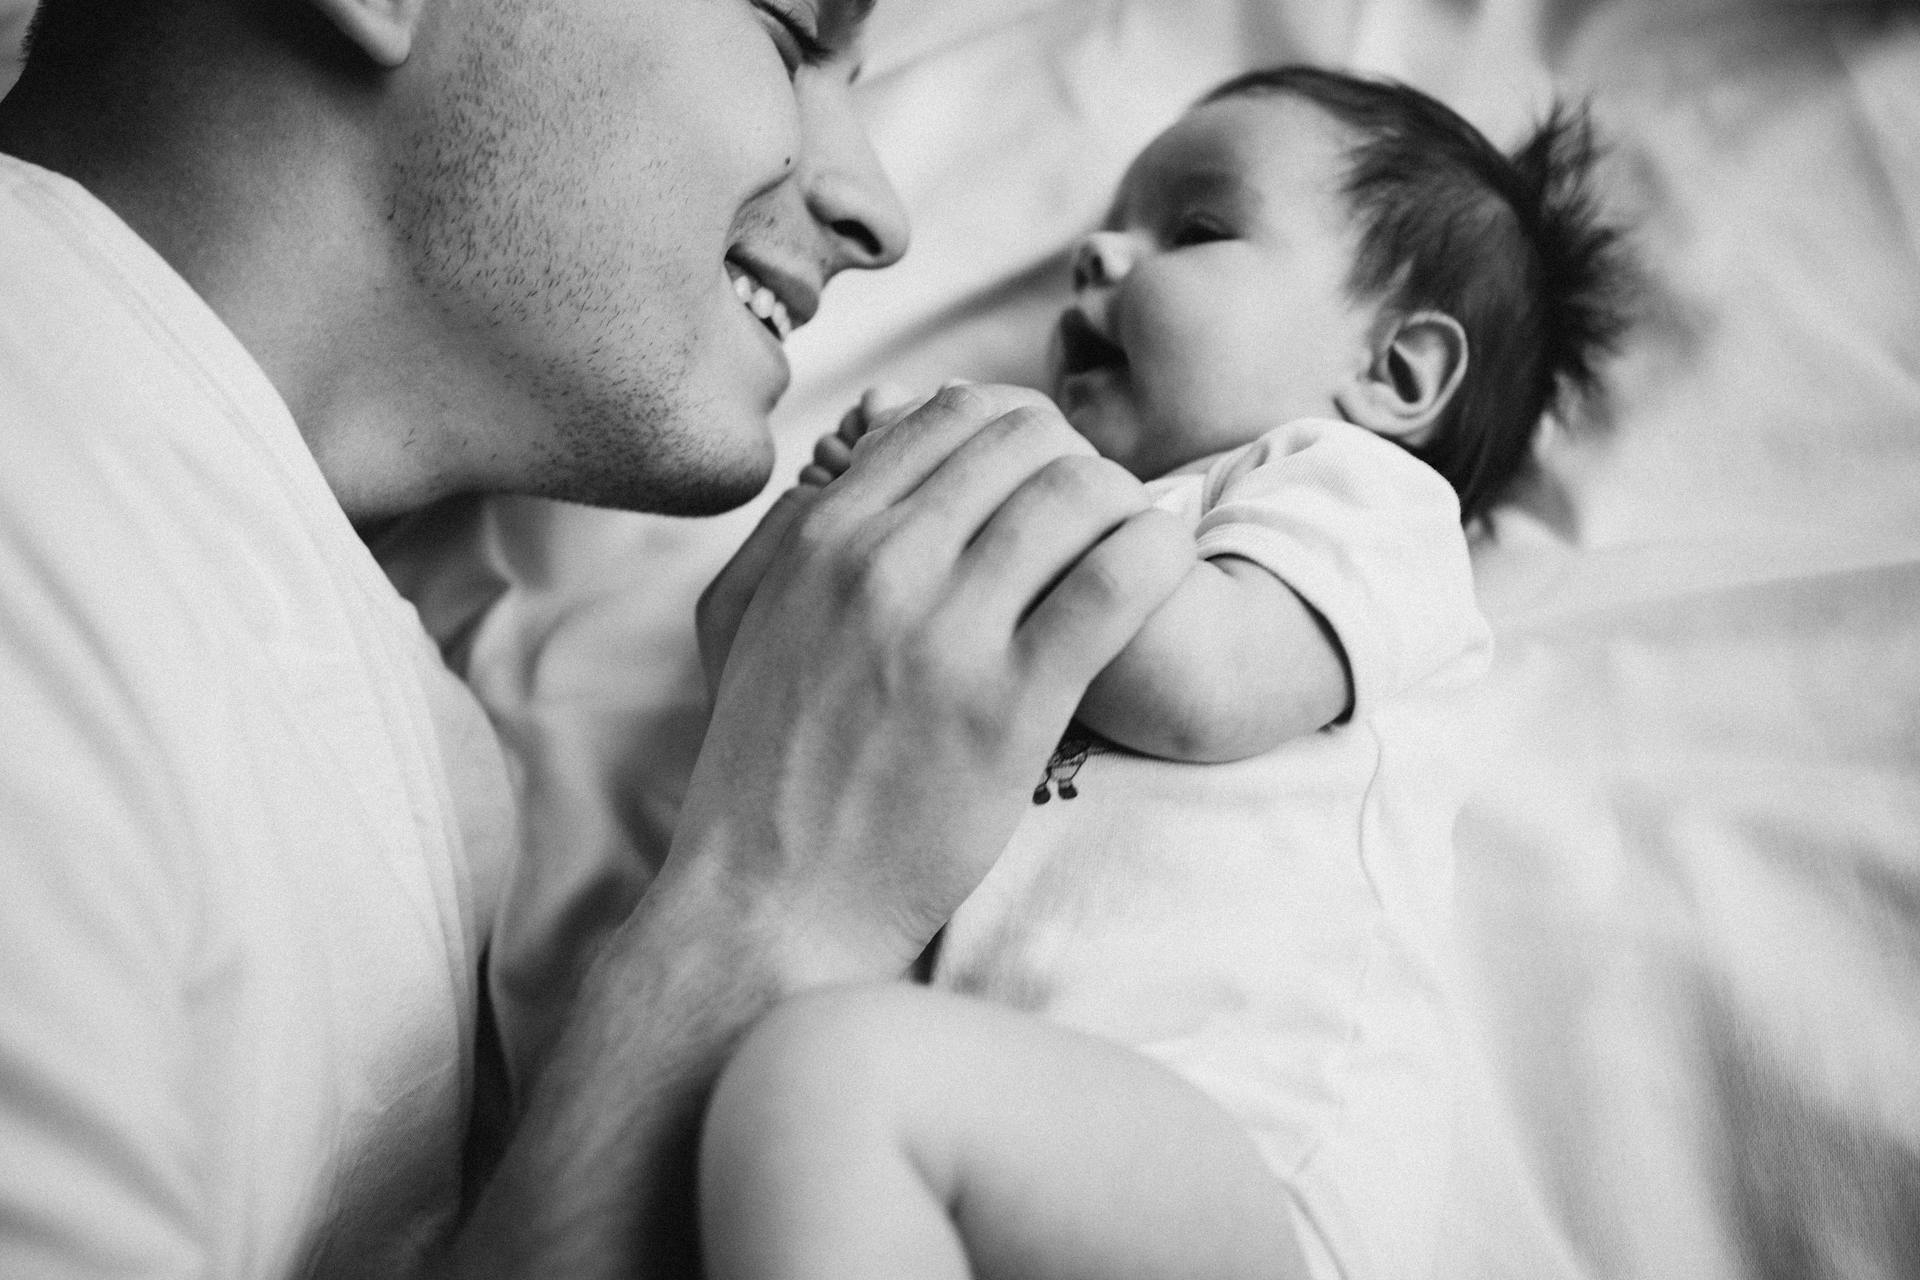 A father lying on bed with his newborn baby | Source: Pexels